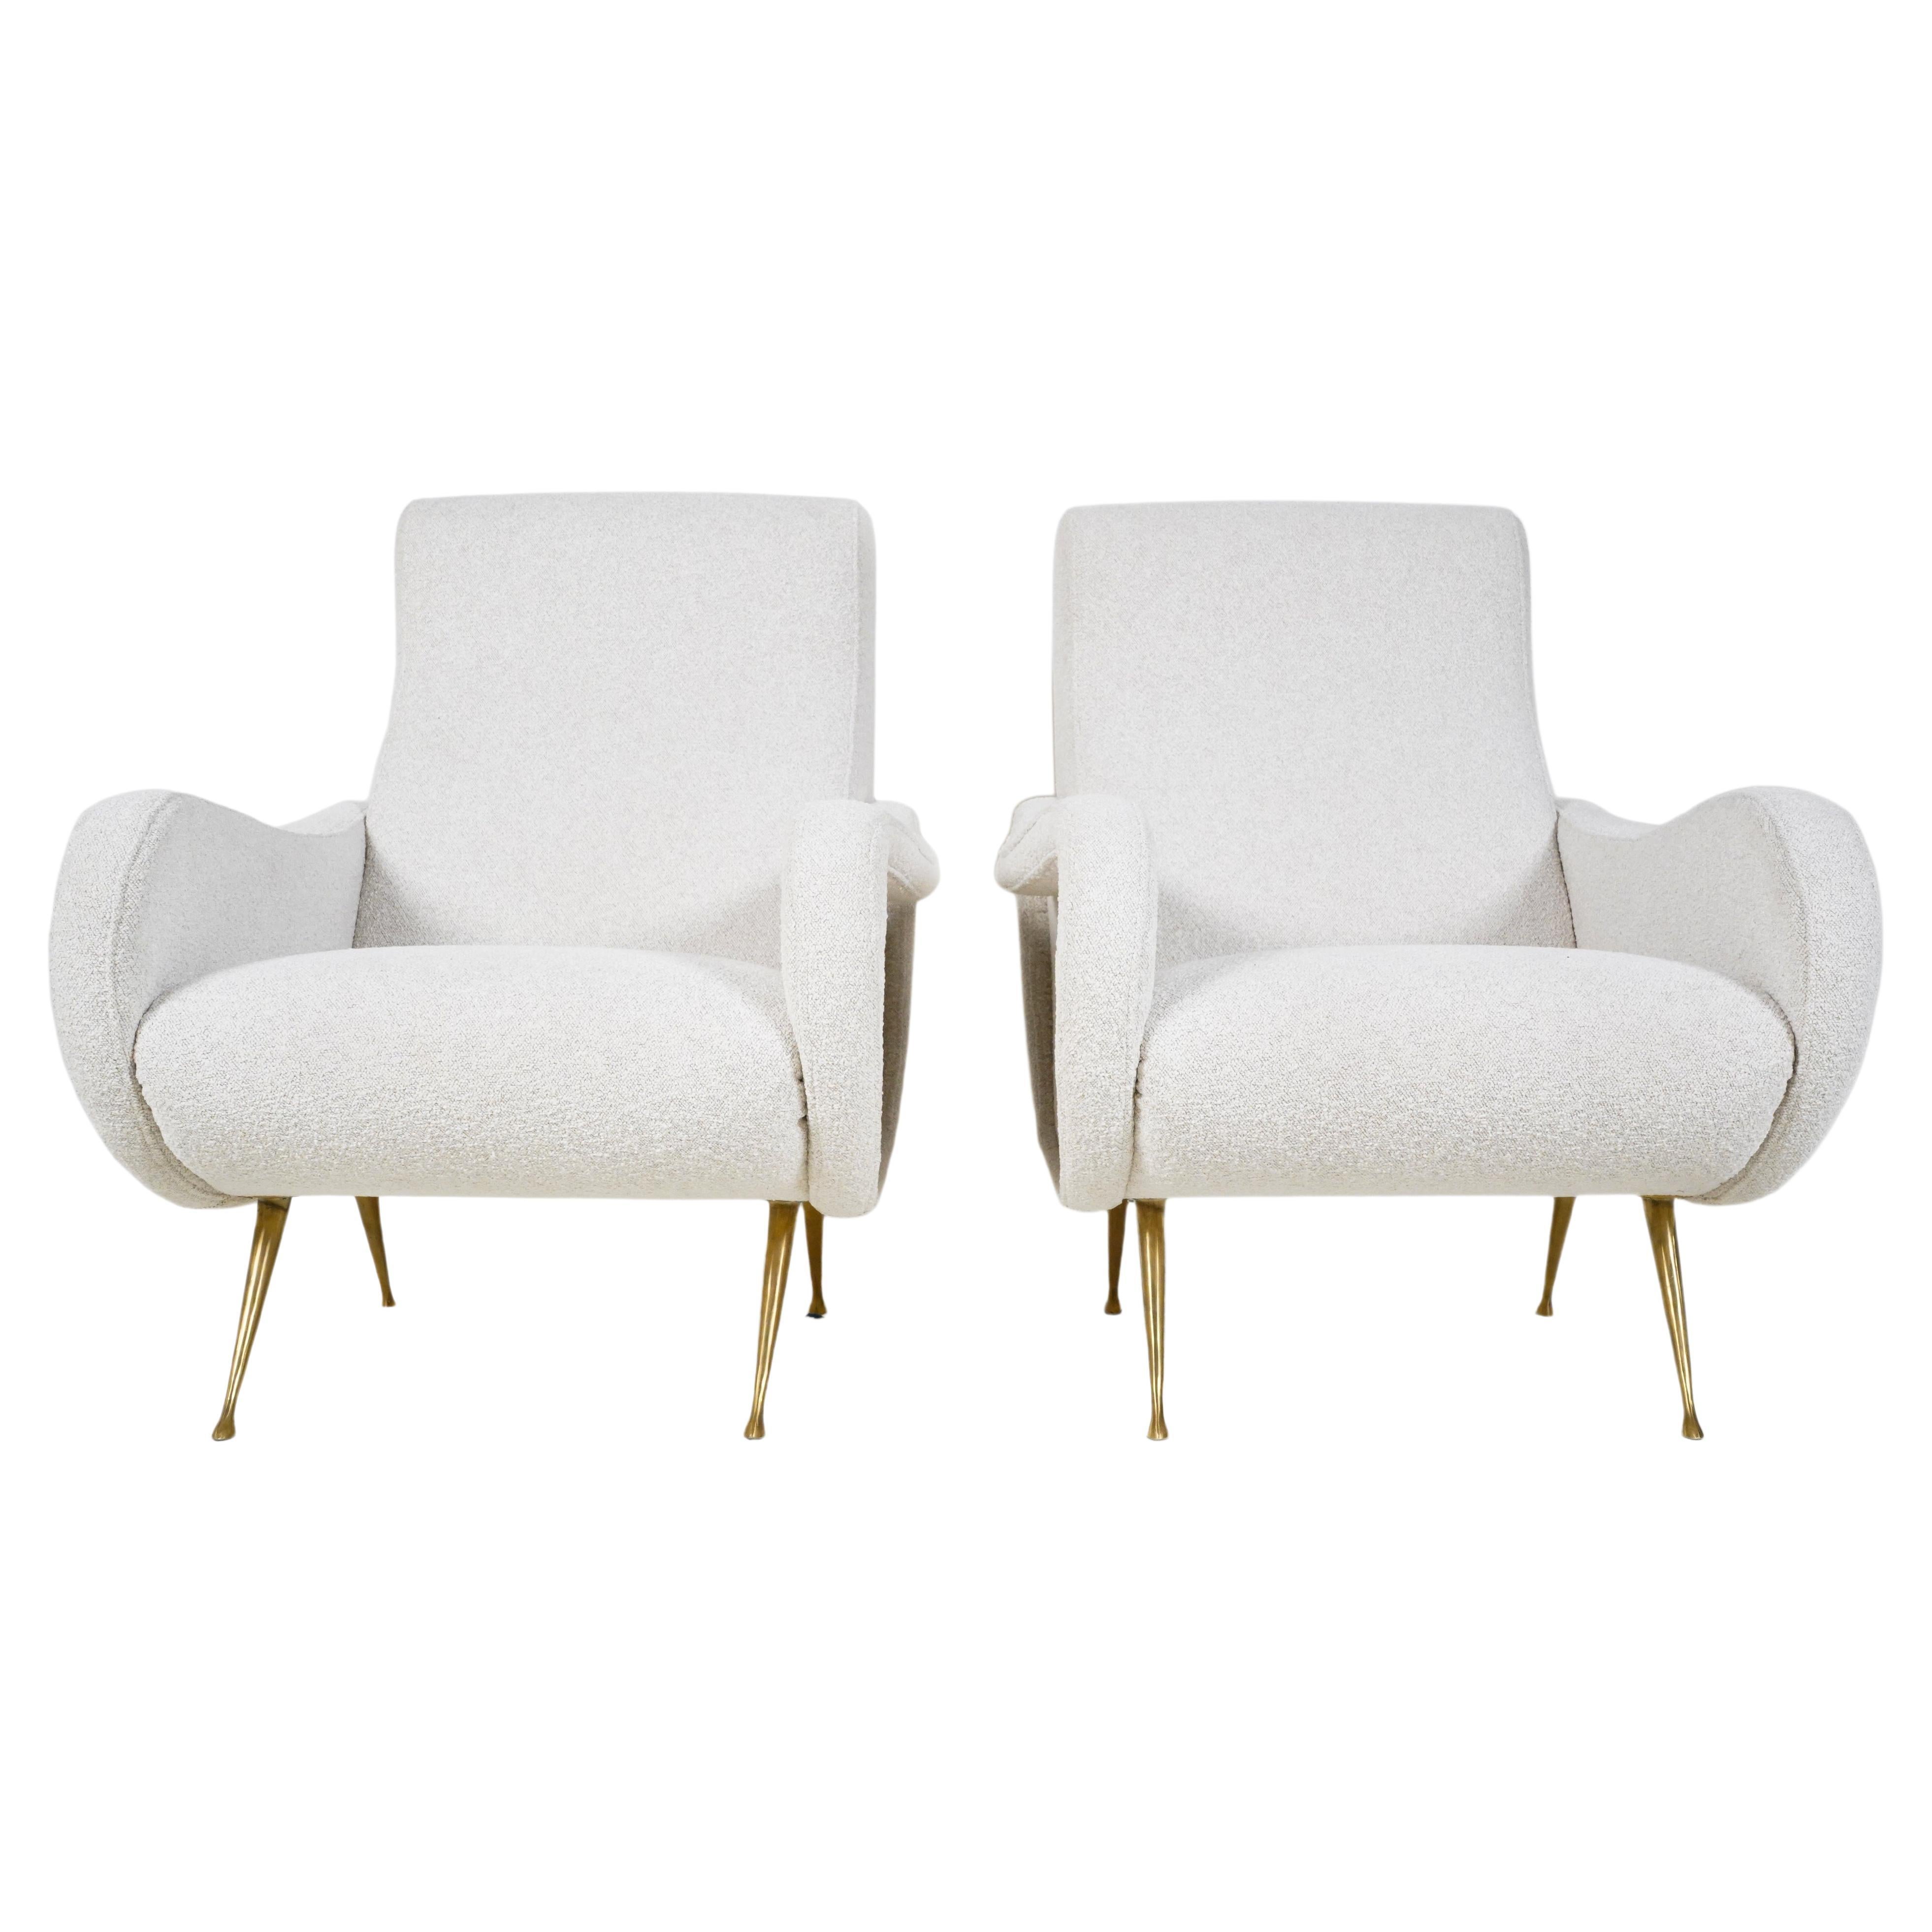 Pair of Vintage Midcentury Armchairs with Brass Legs and Bouclé Upholstery